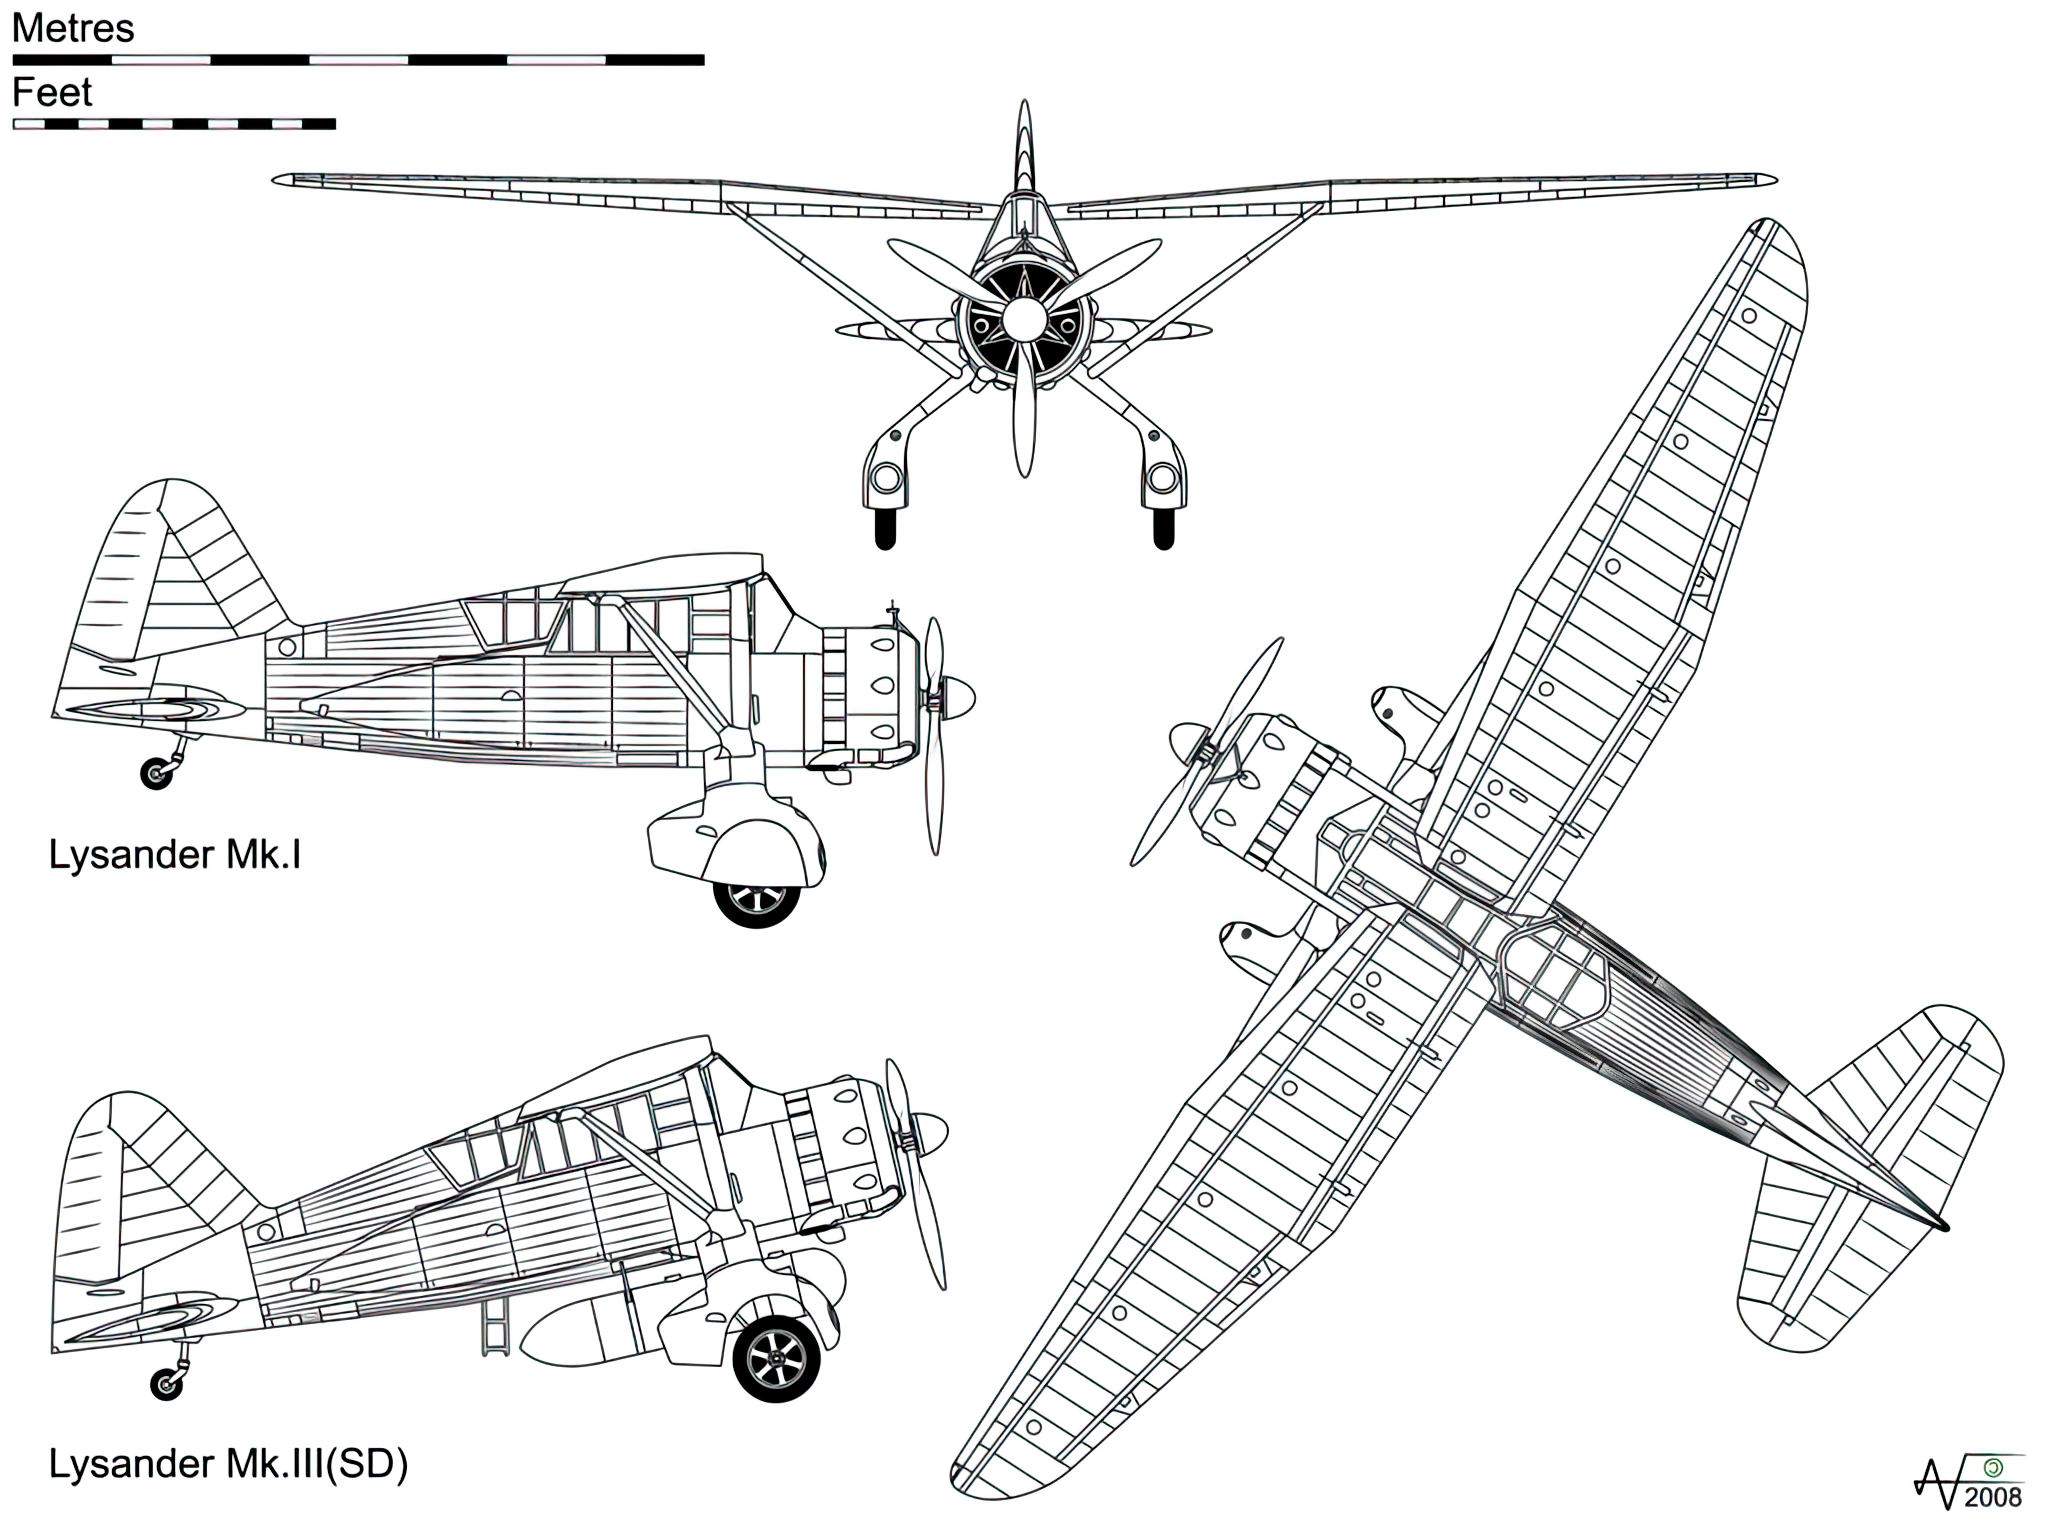 Lysander Mk.I drawing, with additional side view of Mk.III (SD) covert operations aircraft